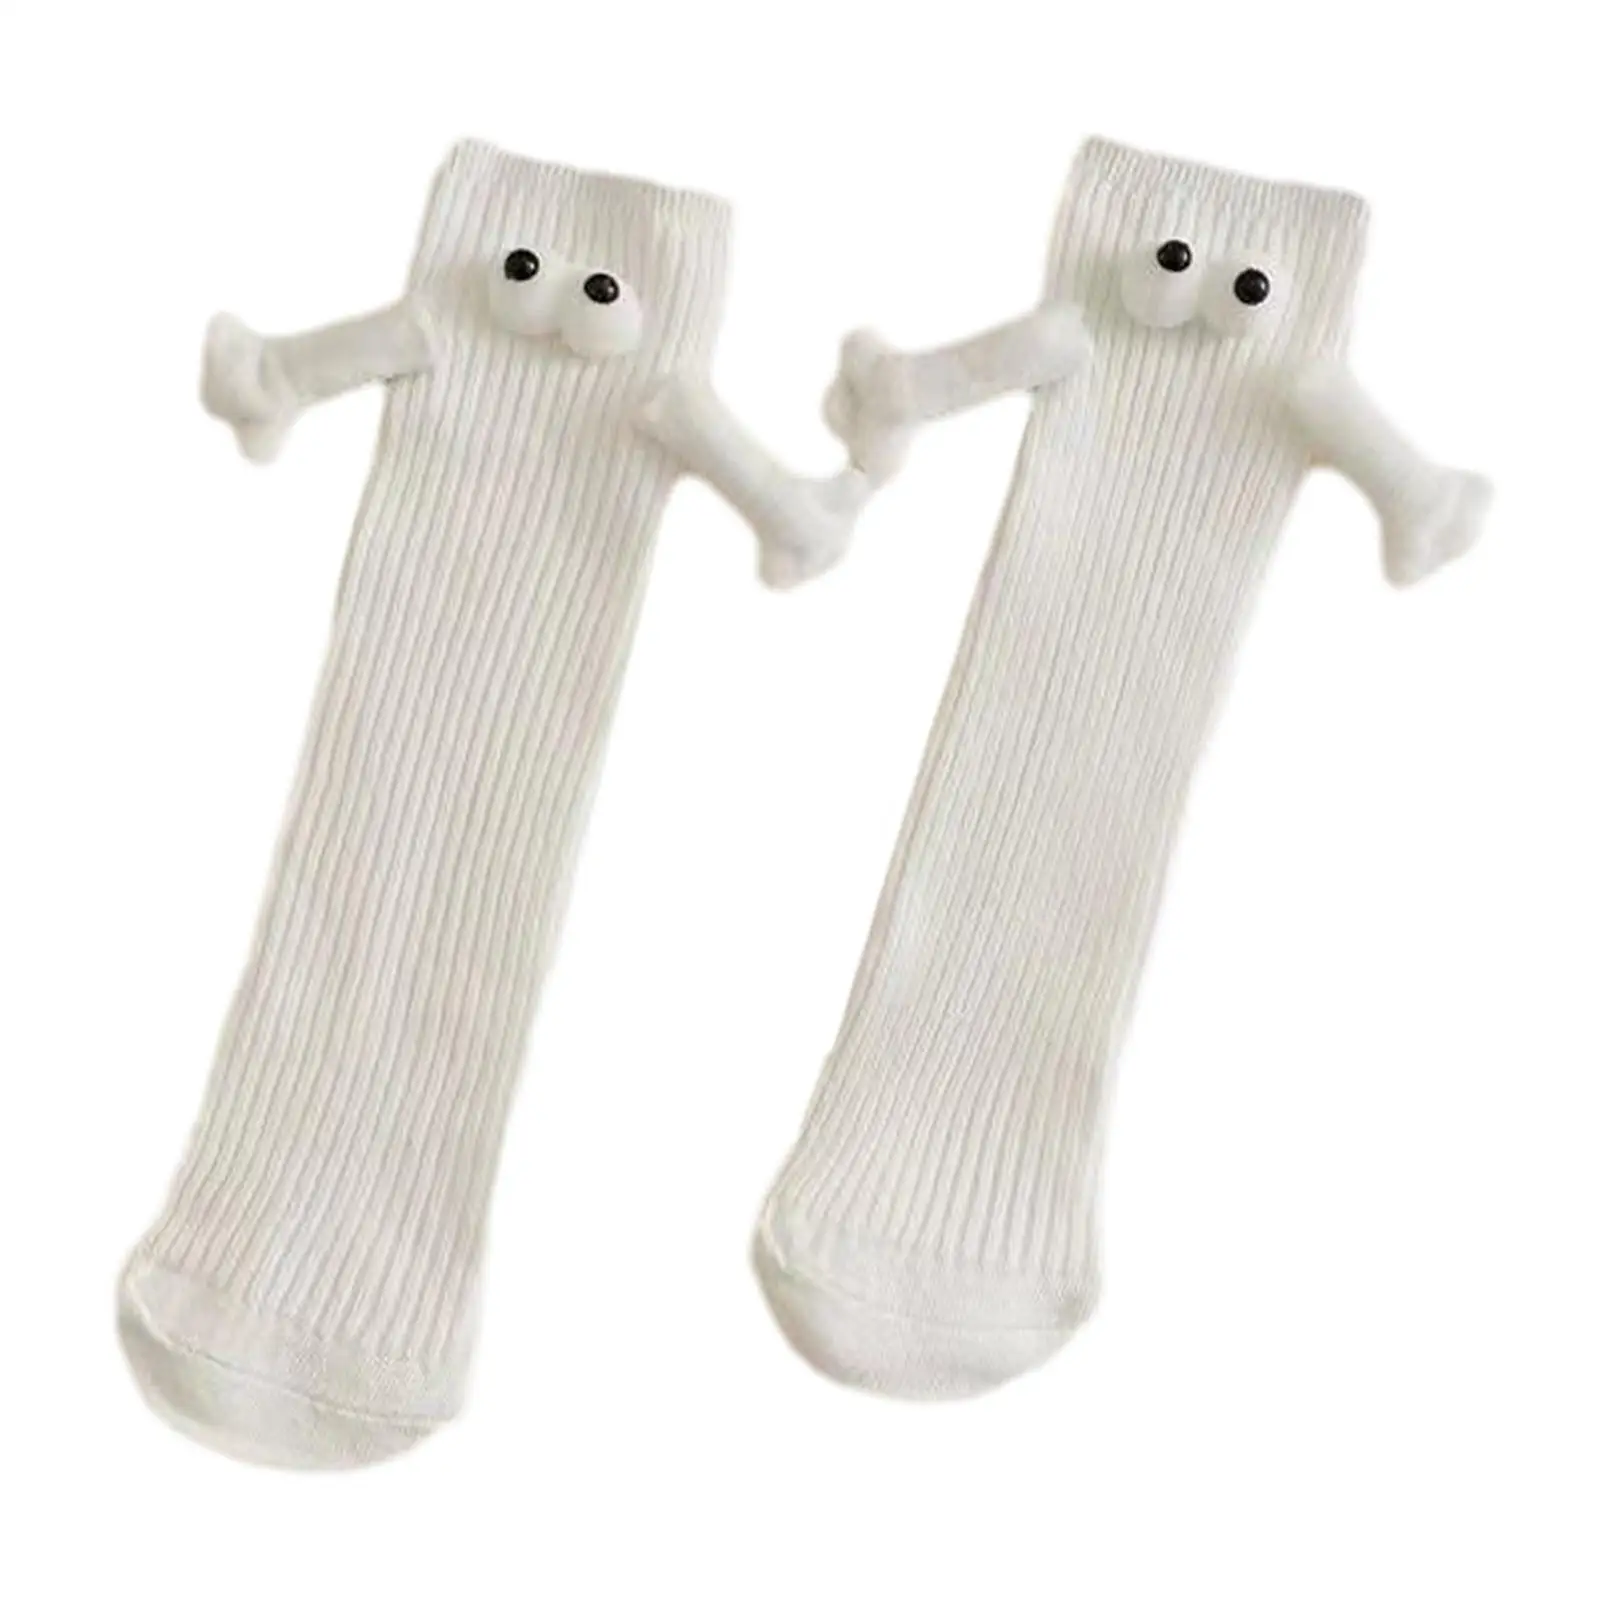 Funny Couple Holding Hands Sock Gifts Socks Soft 1 Pair 3D Doll Eyes Couple Socks Mid Tube Cute Couple Socks for Sisters Friends